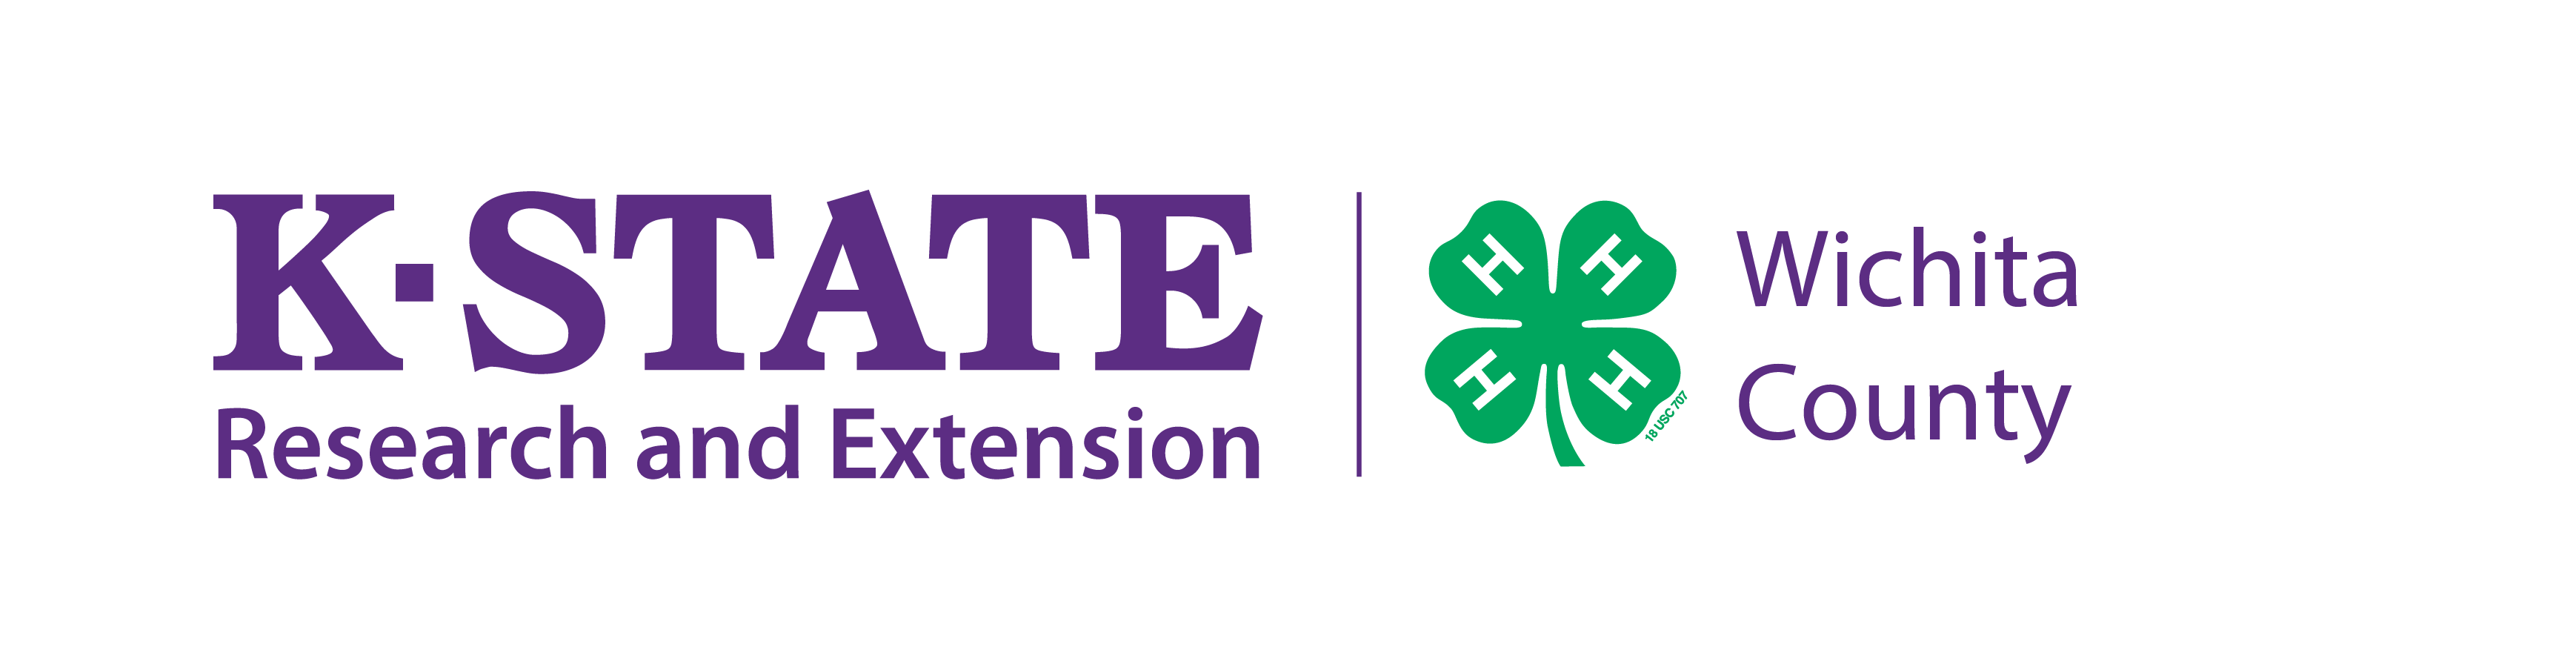 K-State Research & Extension and Clover